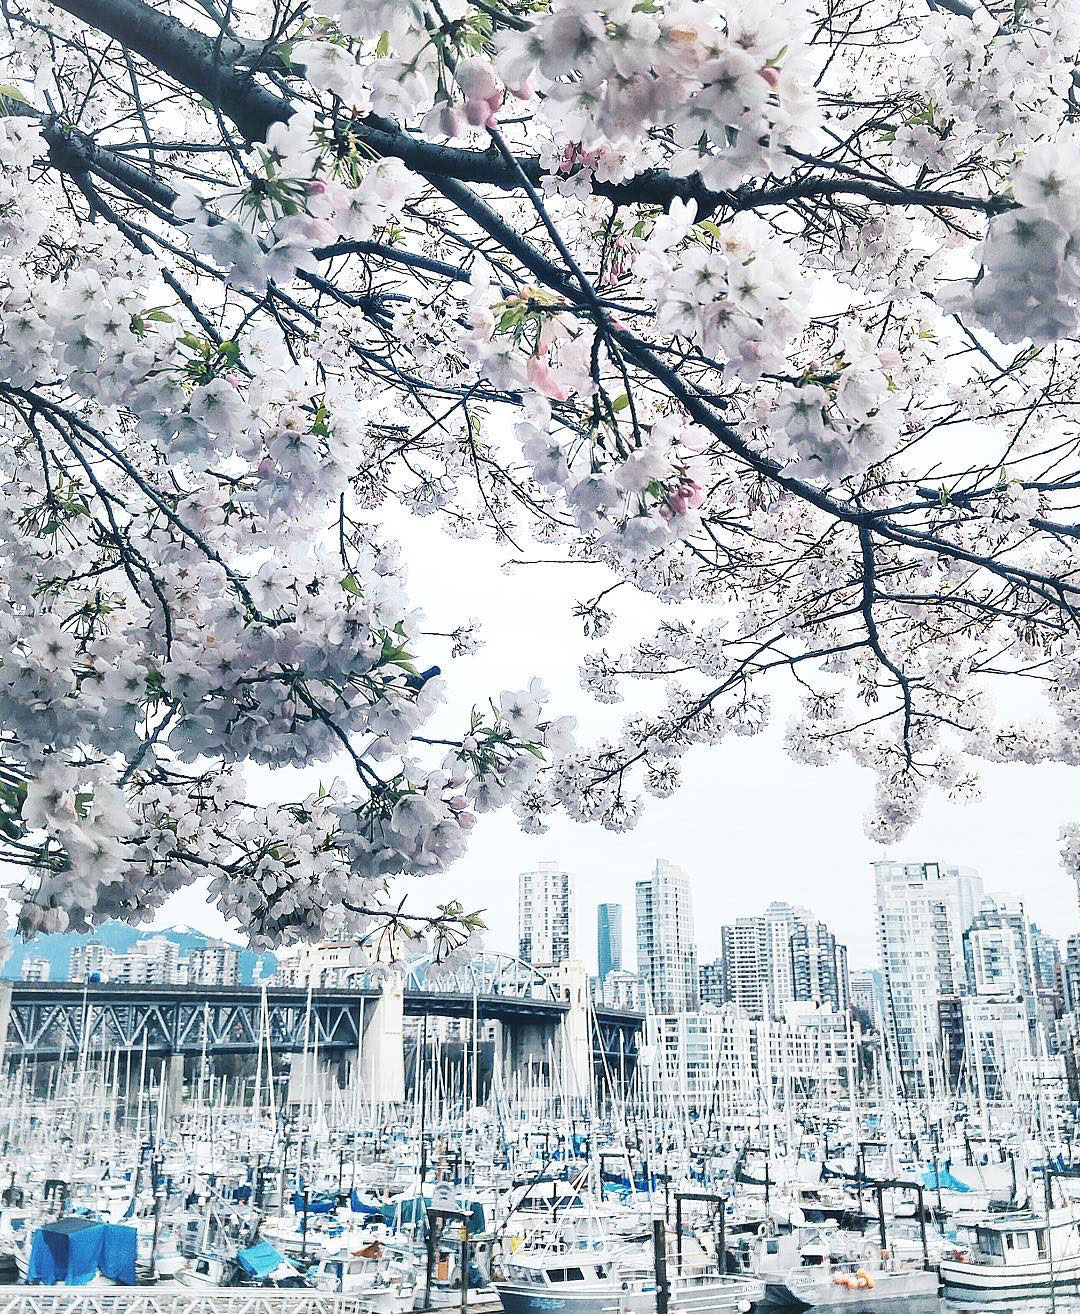 Where to see cherry blossoms in Vancouver at Fairview, Vanier Park, David Lam Park, Go Fish, Granville Island, cherry blossoms spots in Vancouver, best views of cherry blossoms in Vancouver by To Vogue or Bust 